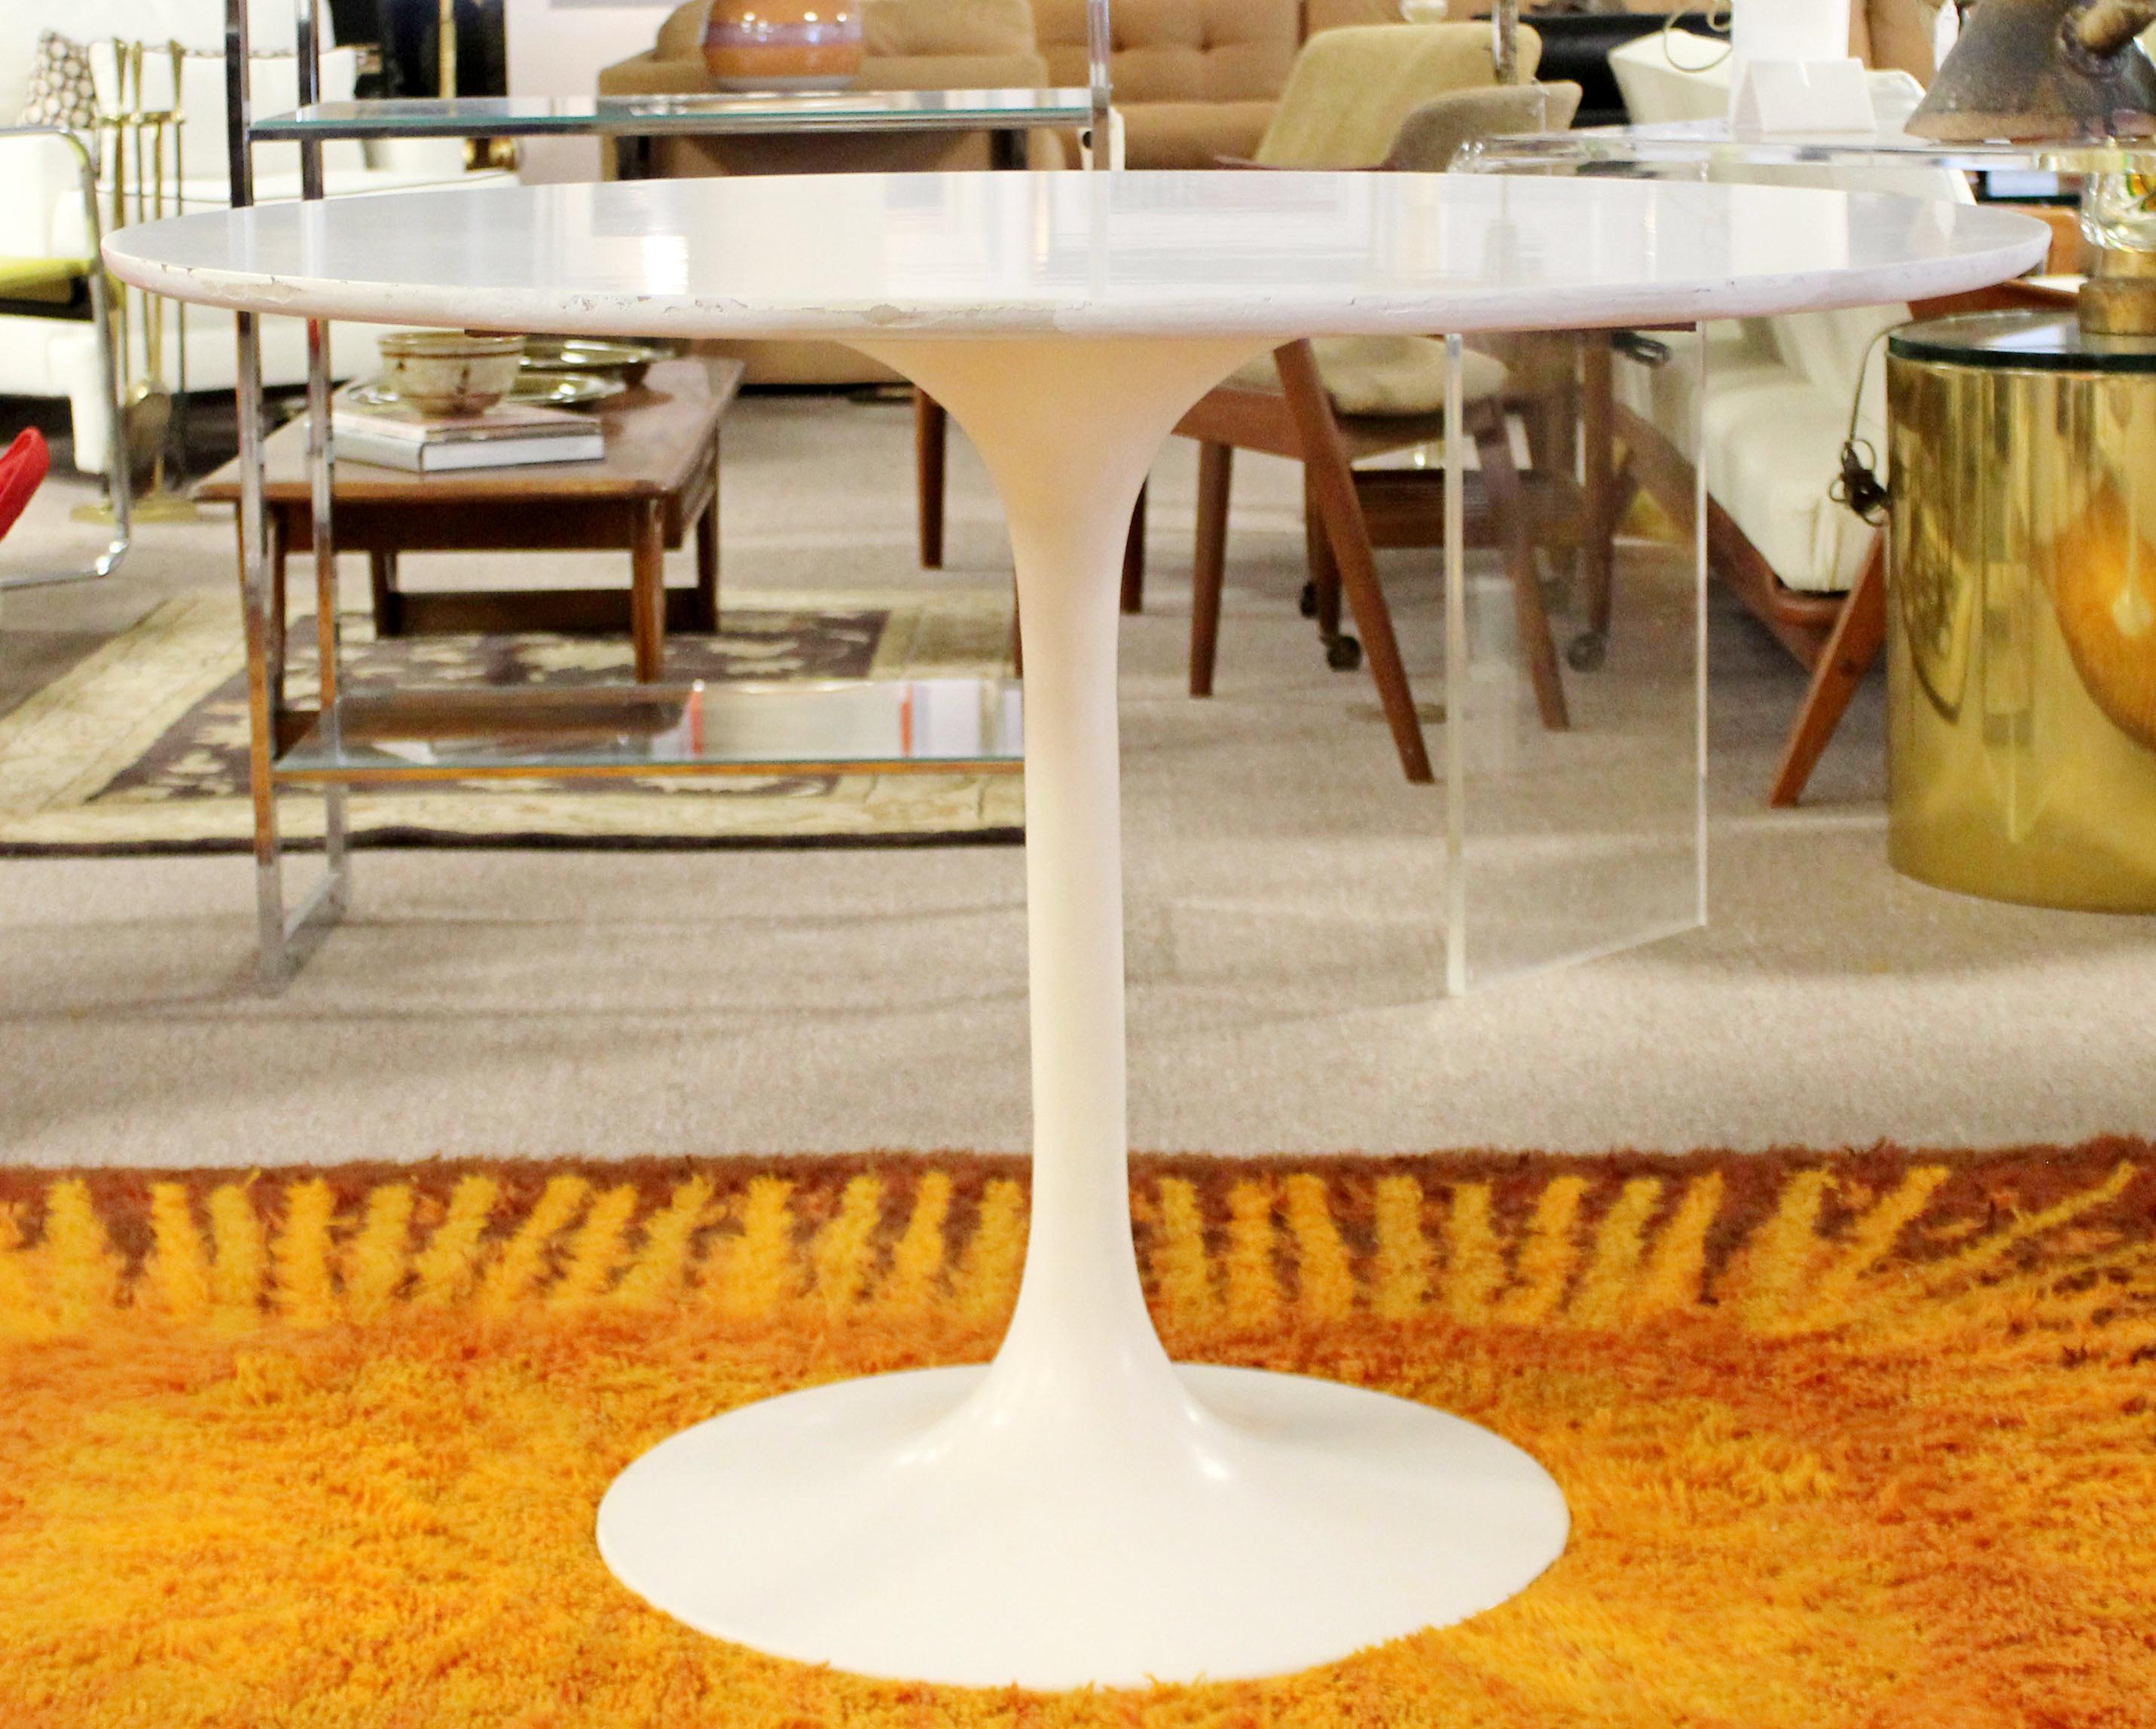 For your consideration is a Saarinen Knoll style, round, Tulip shaped dining dinette table, by Burke, circa the 1960s. In fair vintage condition. The dimensions are 42